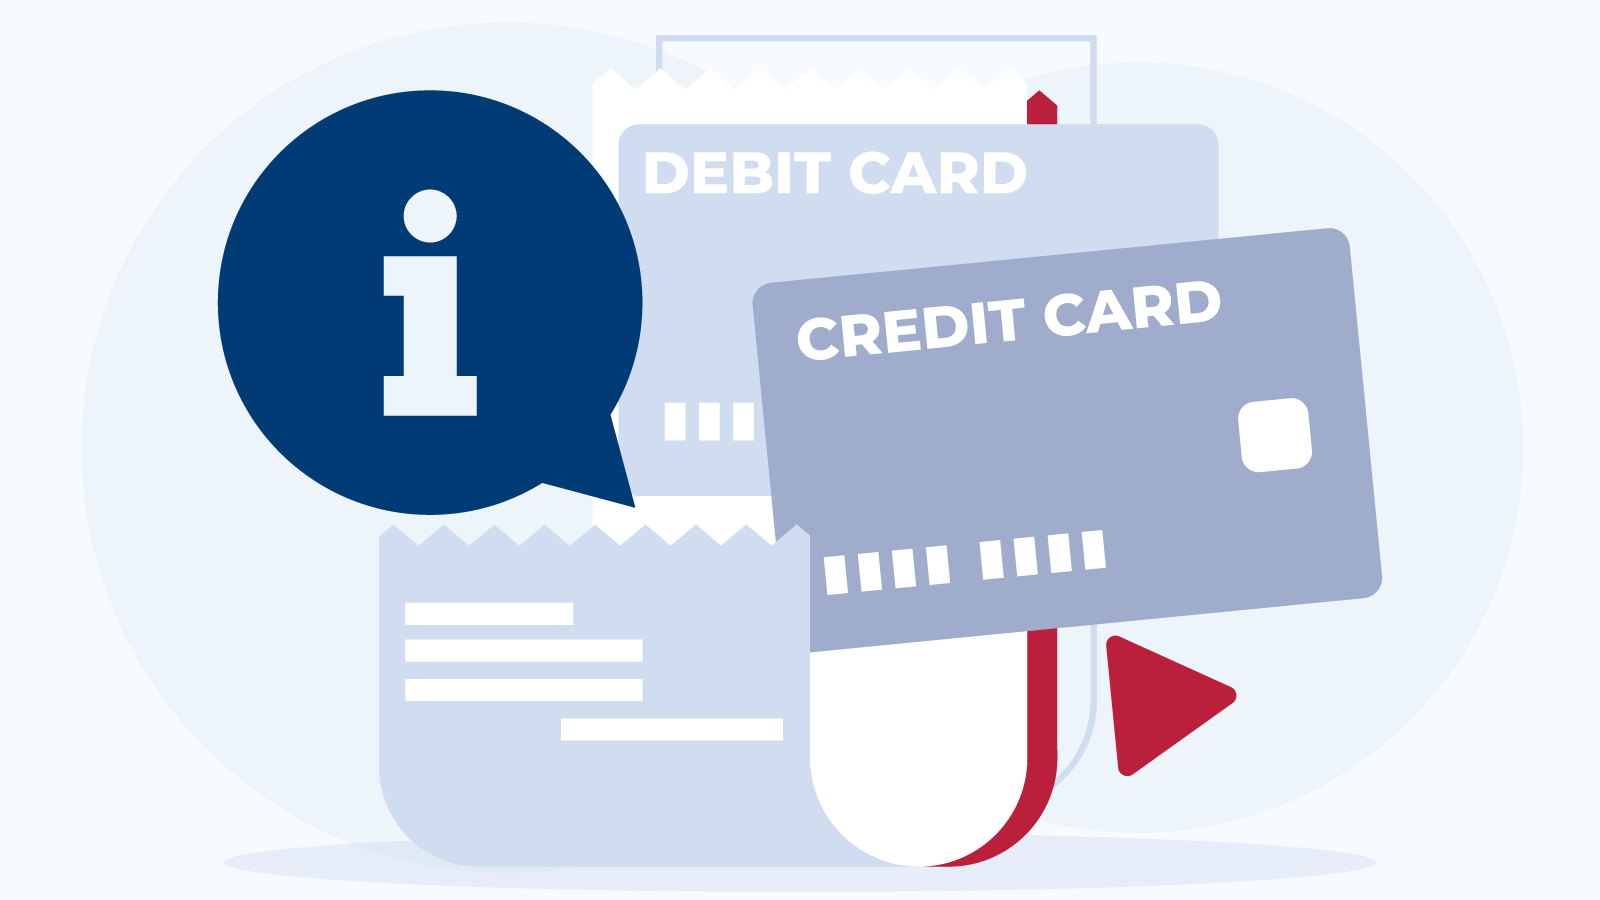 What You Should Know About Debit And Credit Card Payments